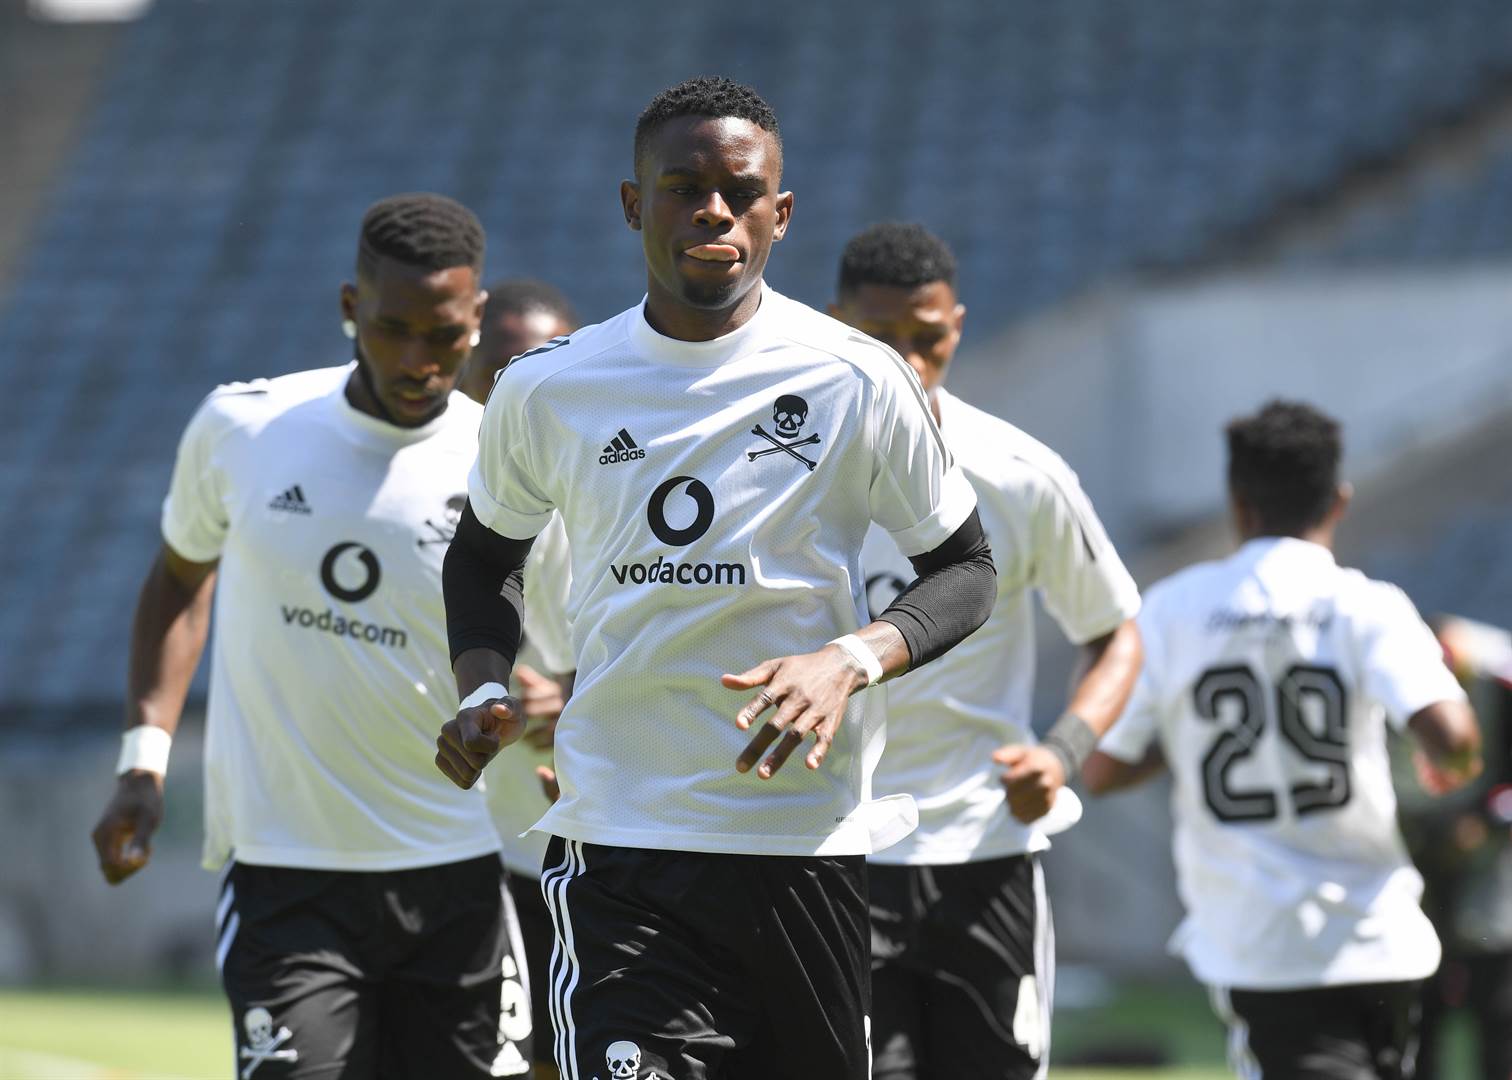 Soweto giants Orlando Pirates celebrate 85th anniversary with new jersey